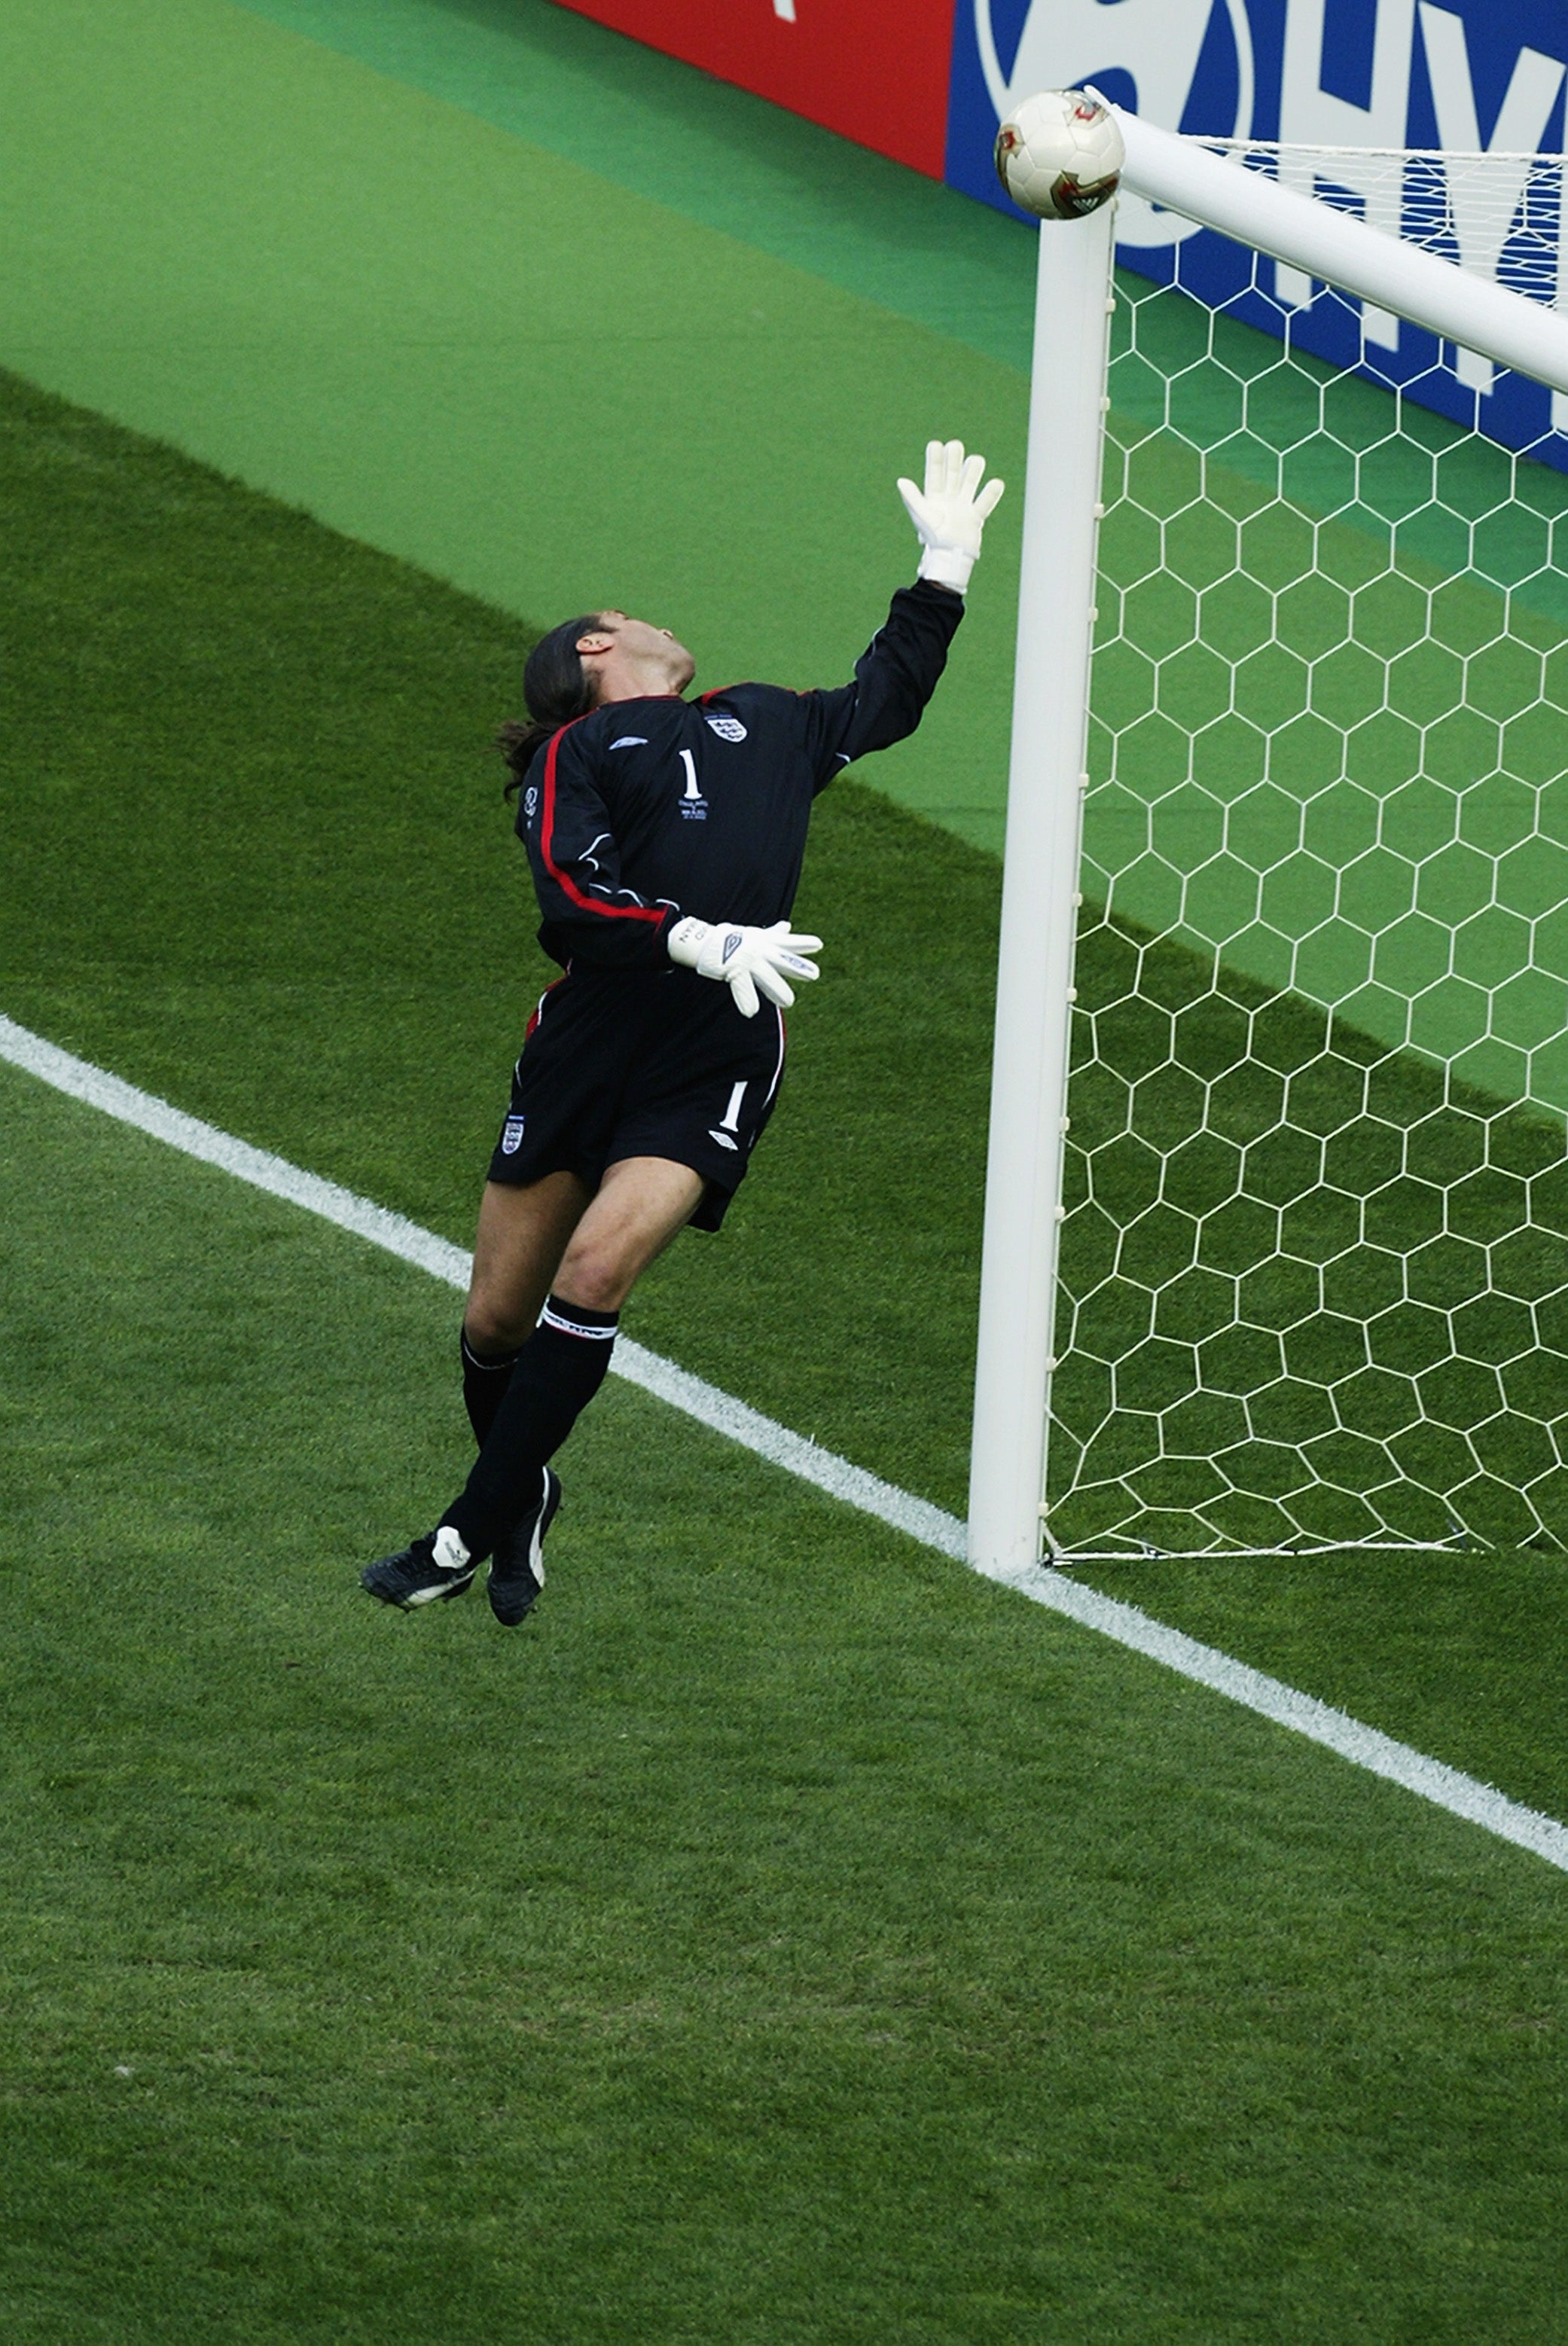 David Seaman is left stranded after an audacious Ronaldinho lob during the 2002 Korean World Cup